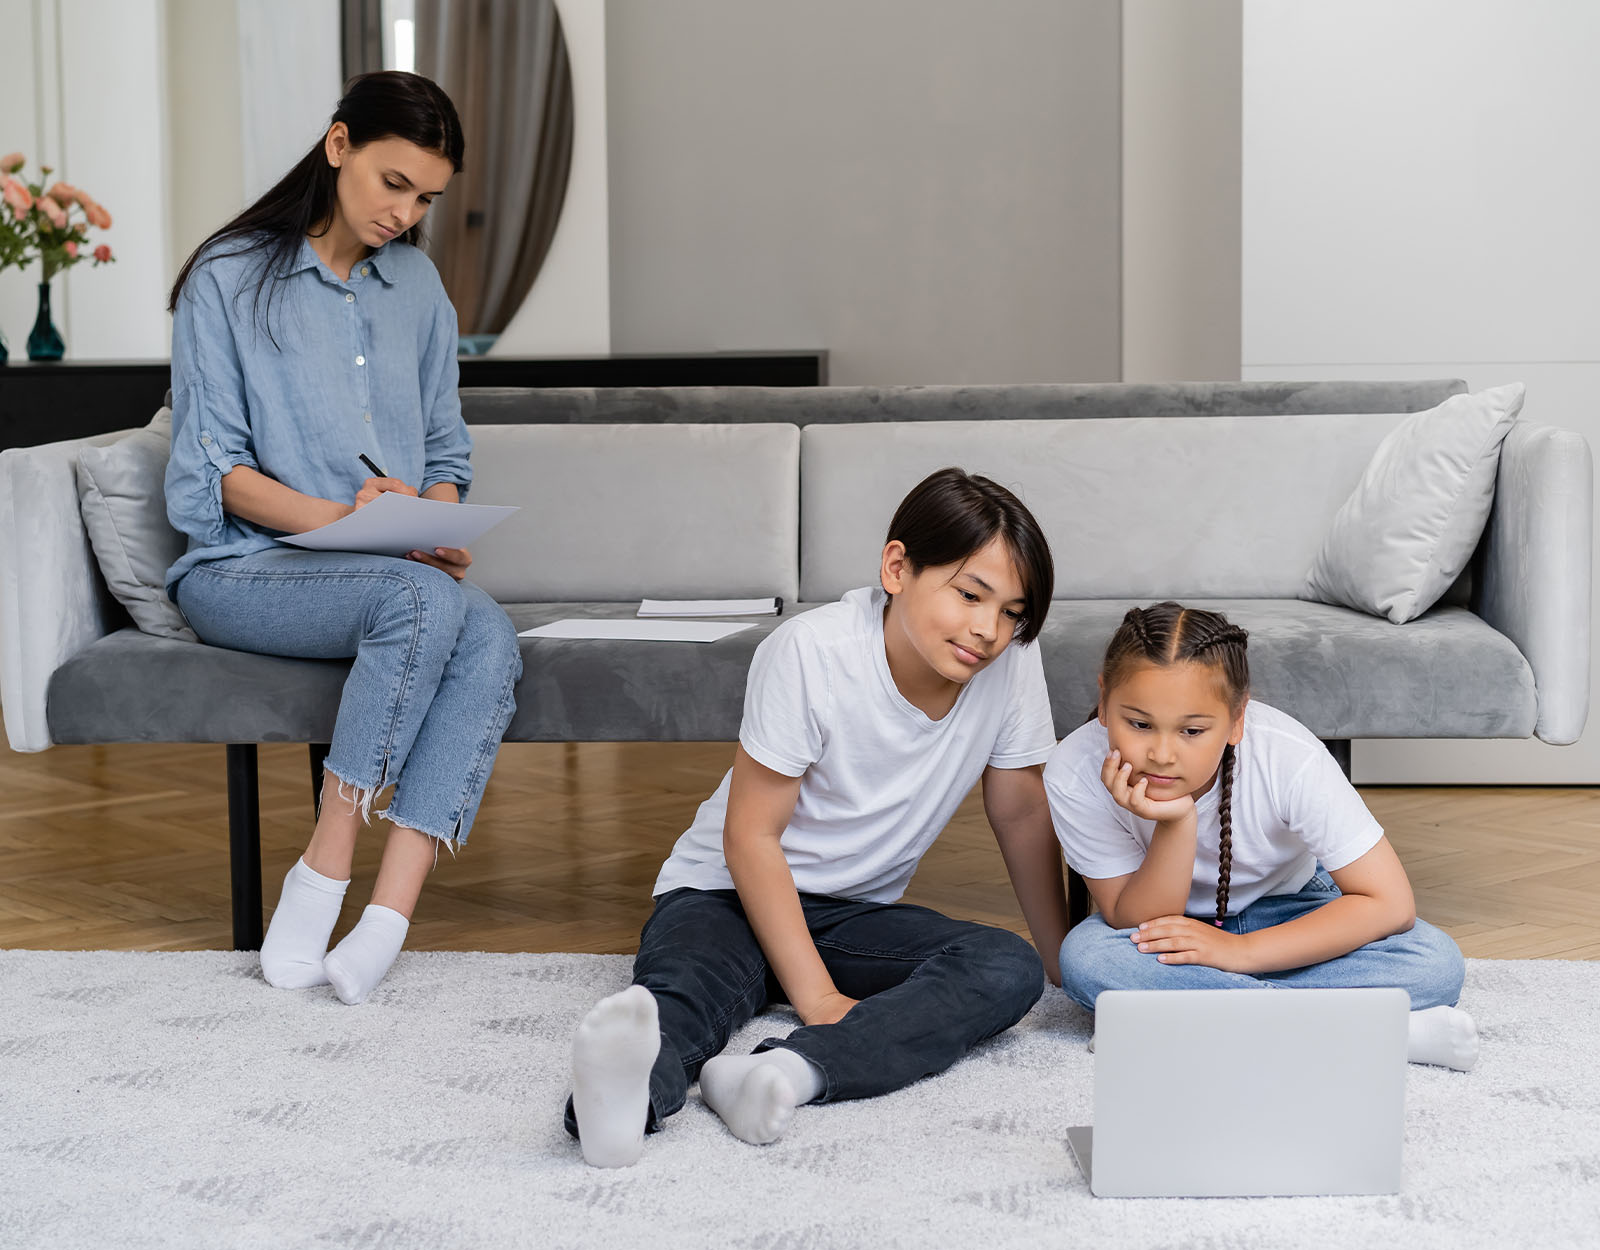 parent looking over while children use technology